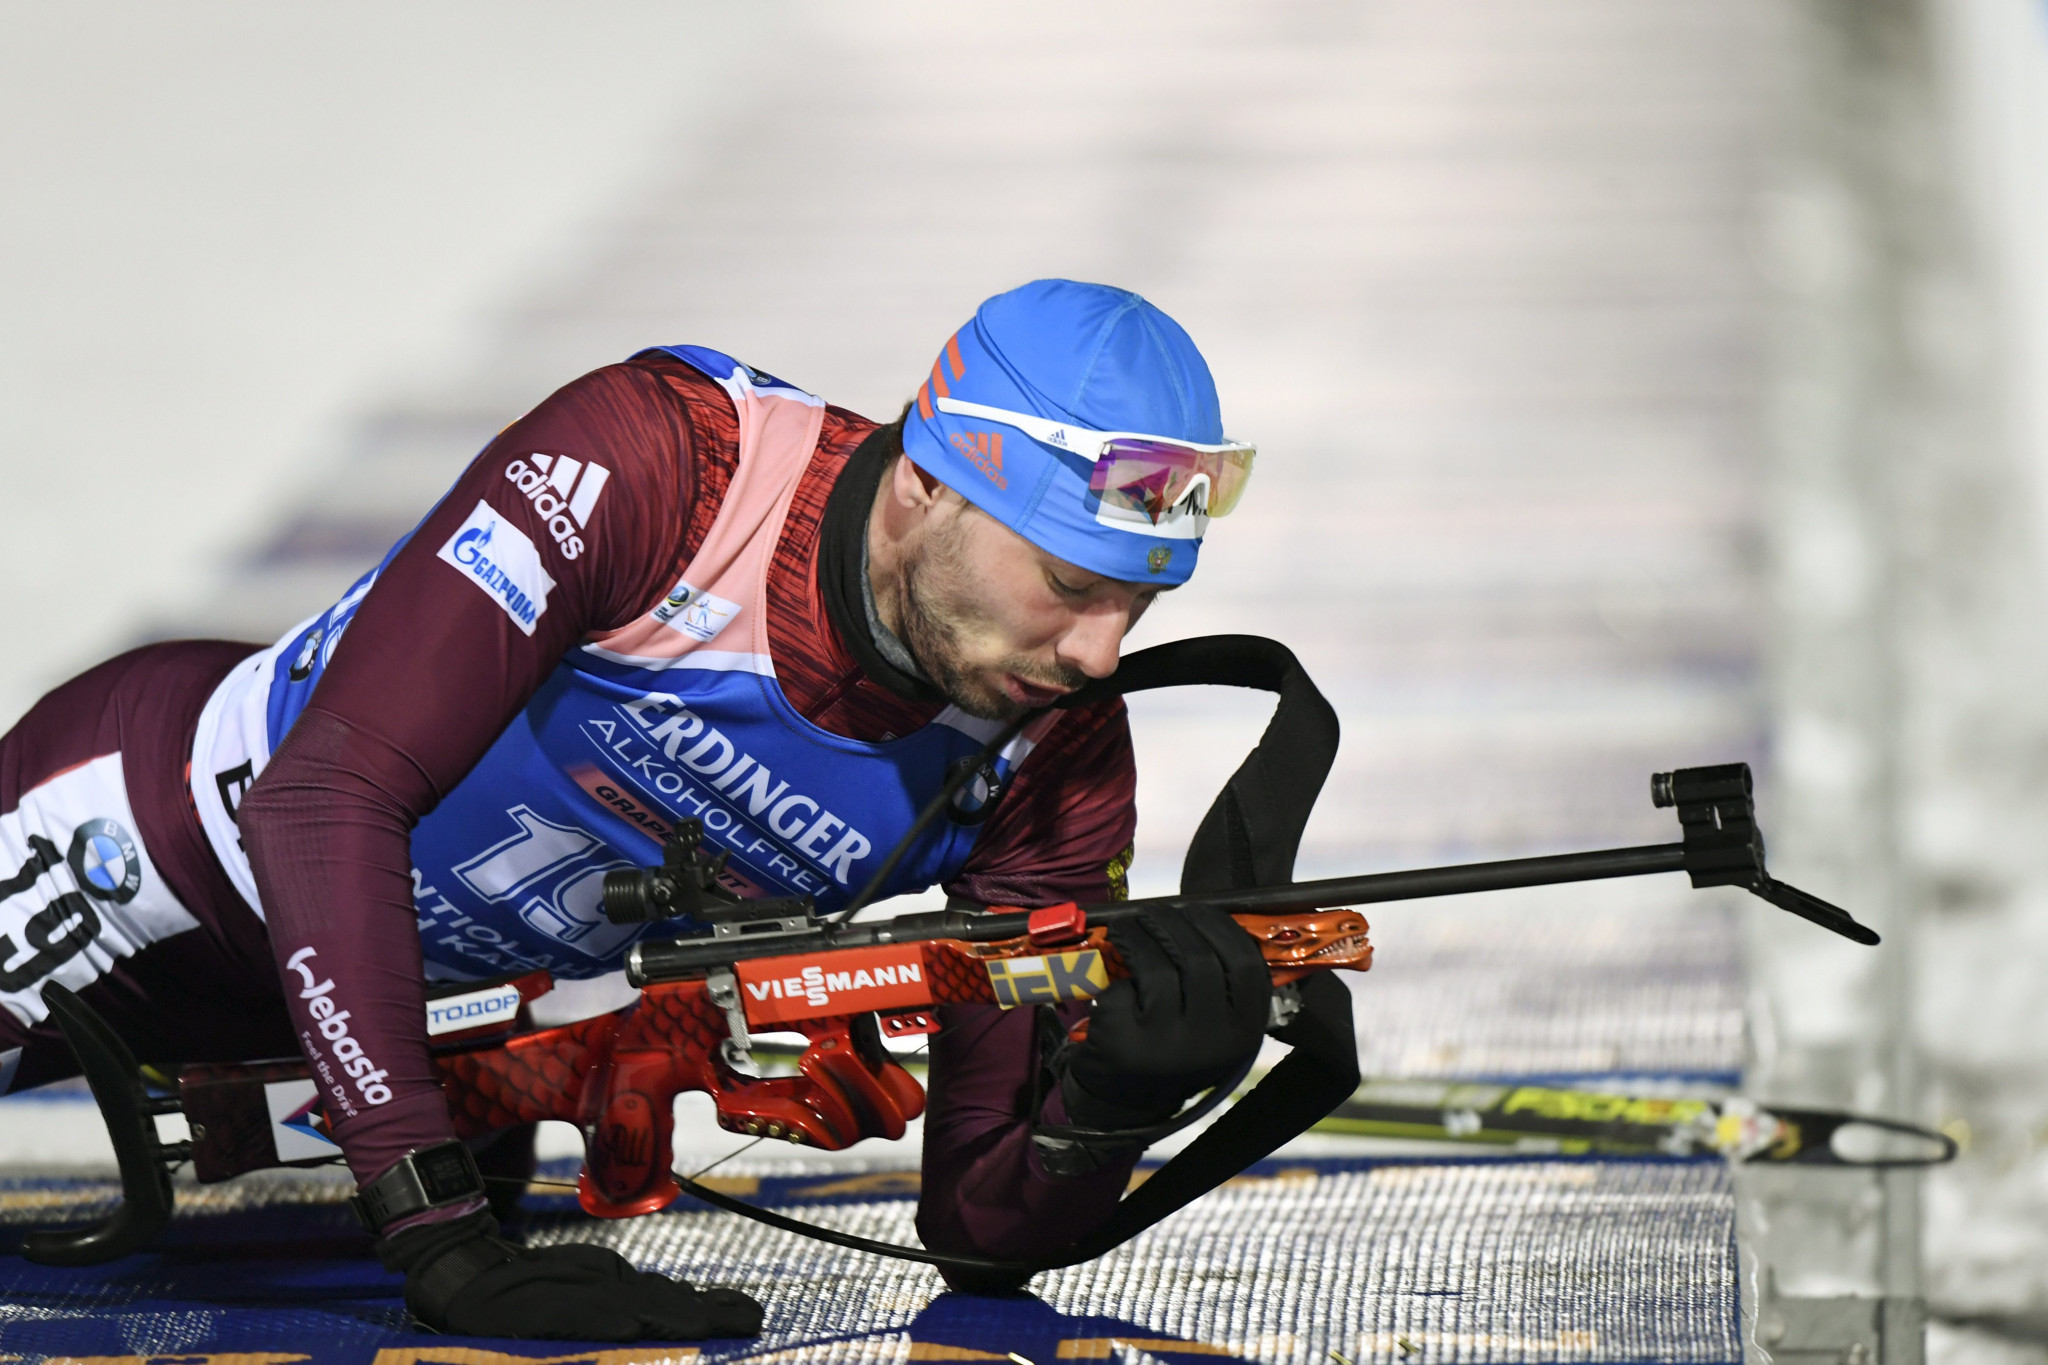 Anton Shipulin is one of the Russian biathletes reportedly under investigation in Austria ©Getty Images